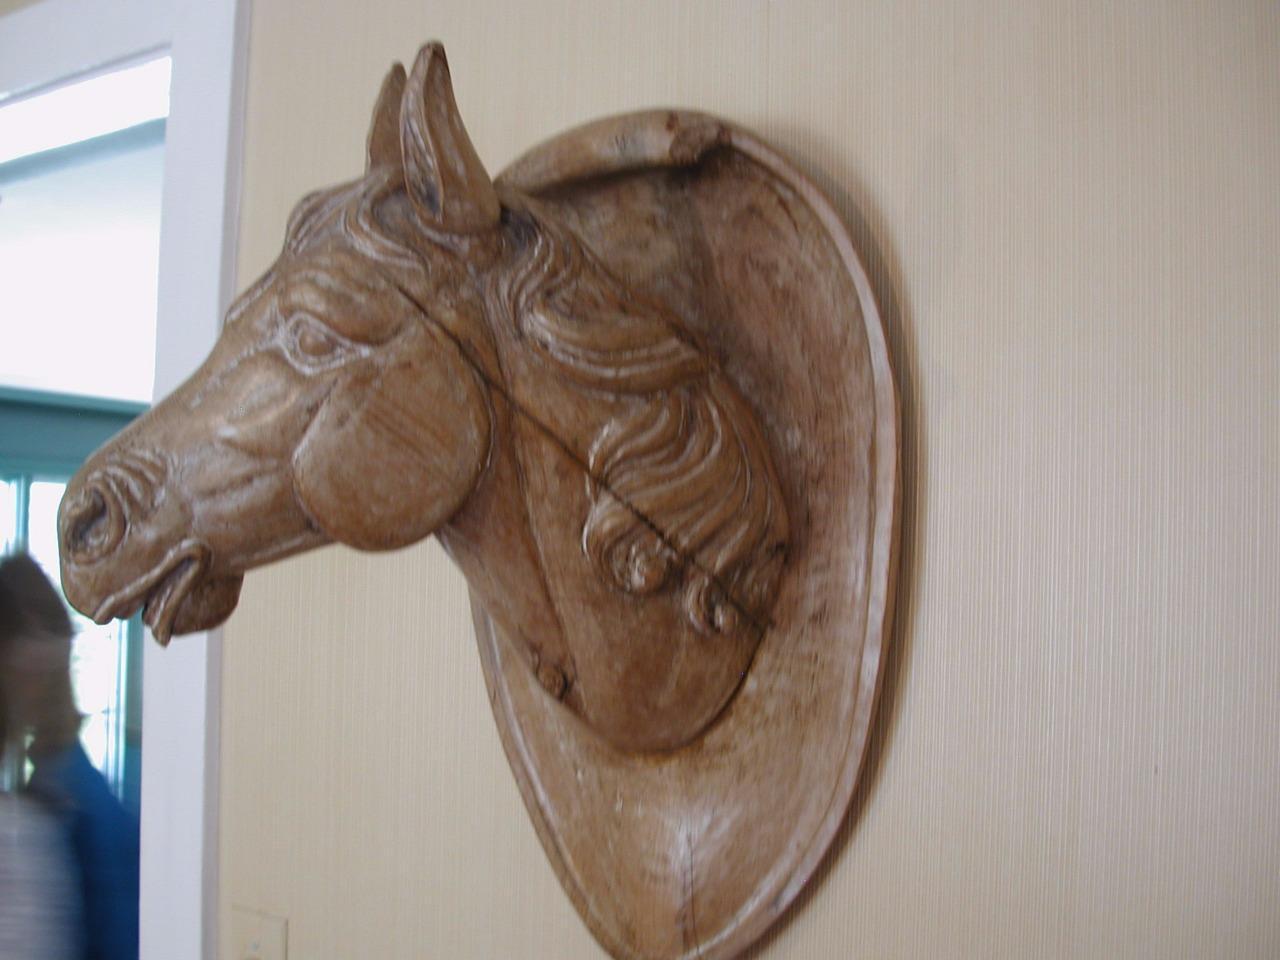 Horse Head carved three dimensional wall hanging pickled maple finished